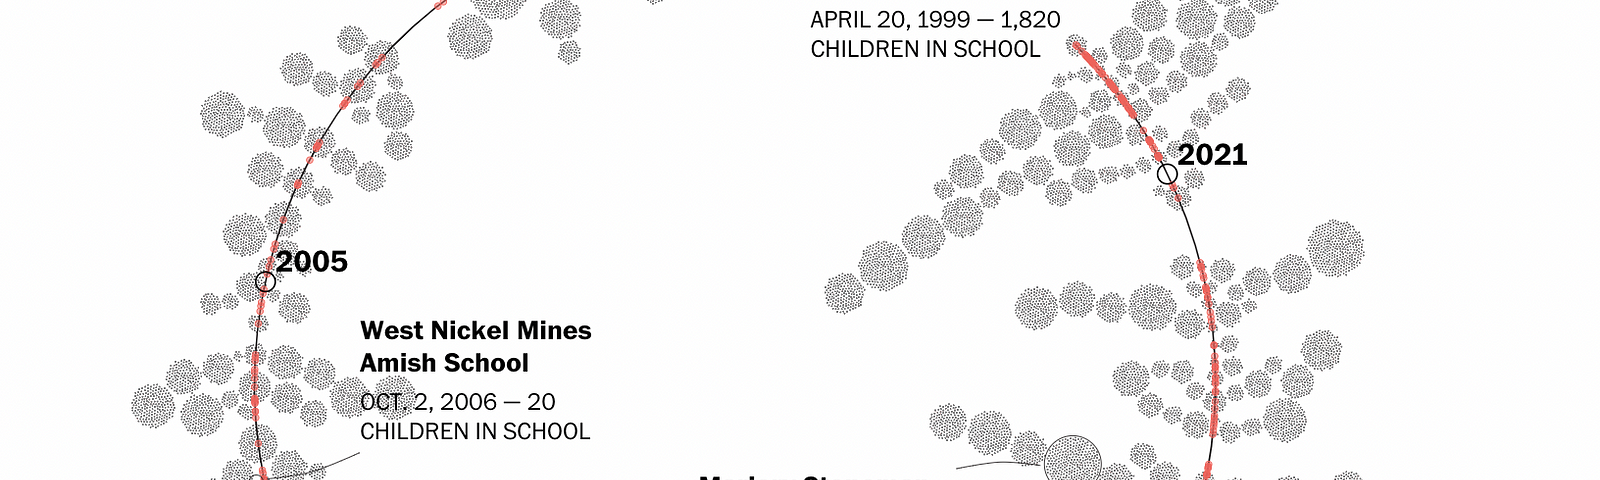 A gaphic displaying the school shootings from 1999 through May 2022.